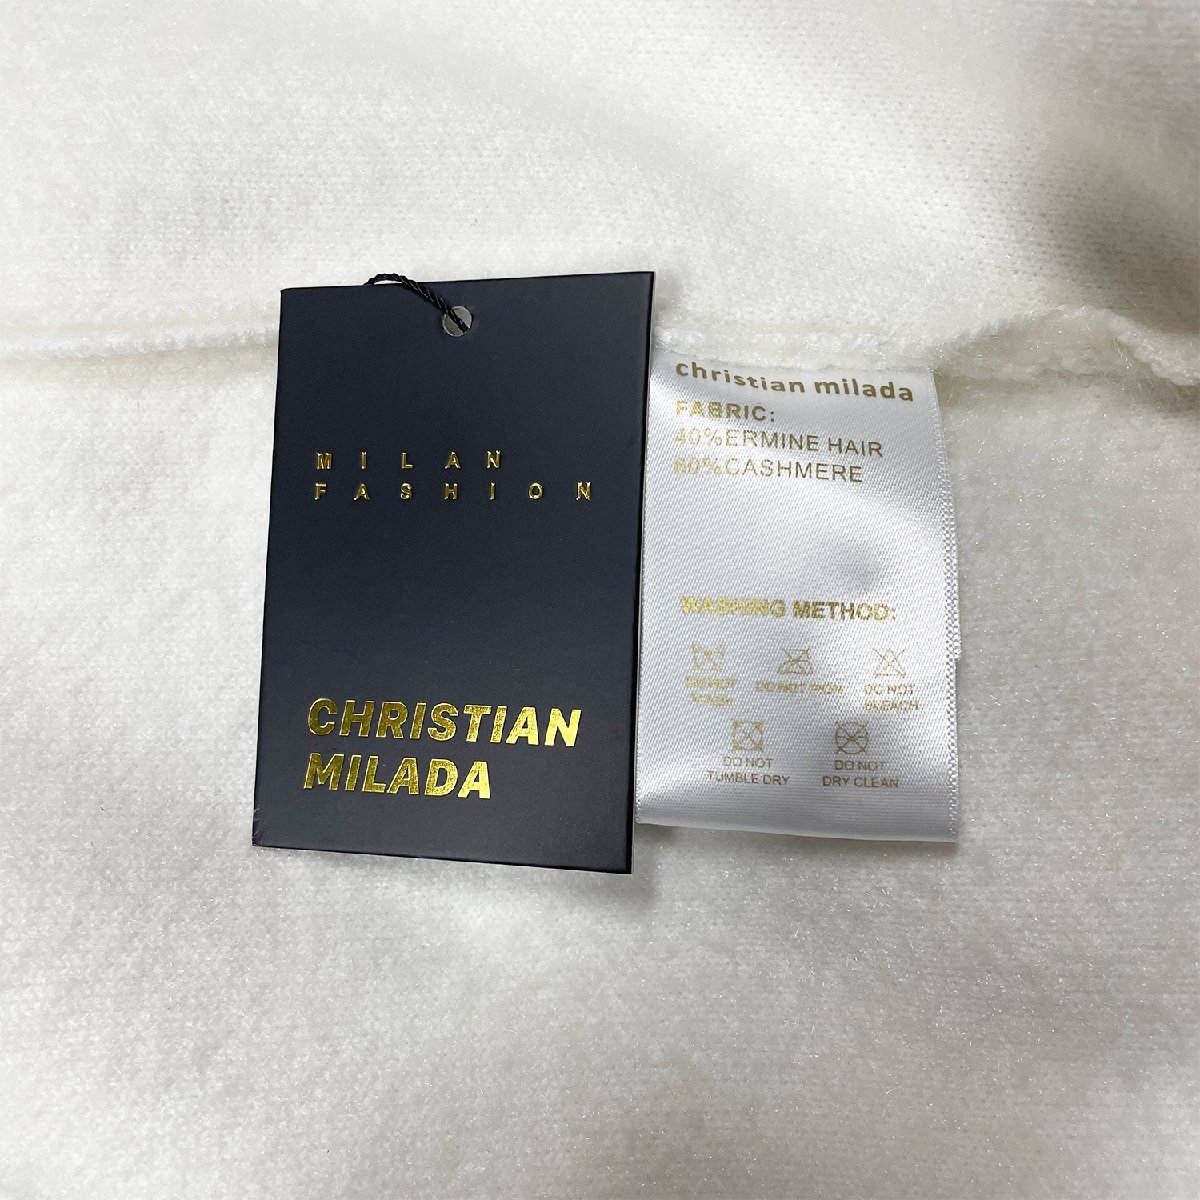  regular price 5 ten thousand *christian milada* milano departure * sweater * fine quality cashmere / mink . comfortable heat insulation soft knitted pull over autumn winter standard L/48 size 